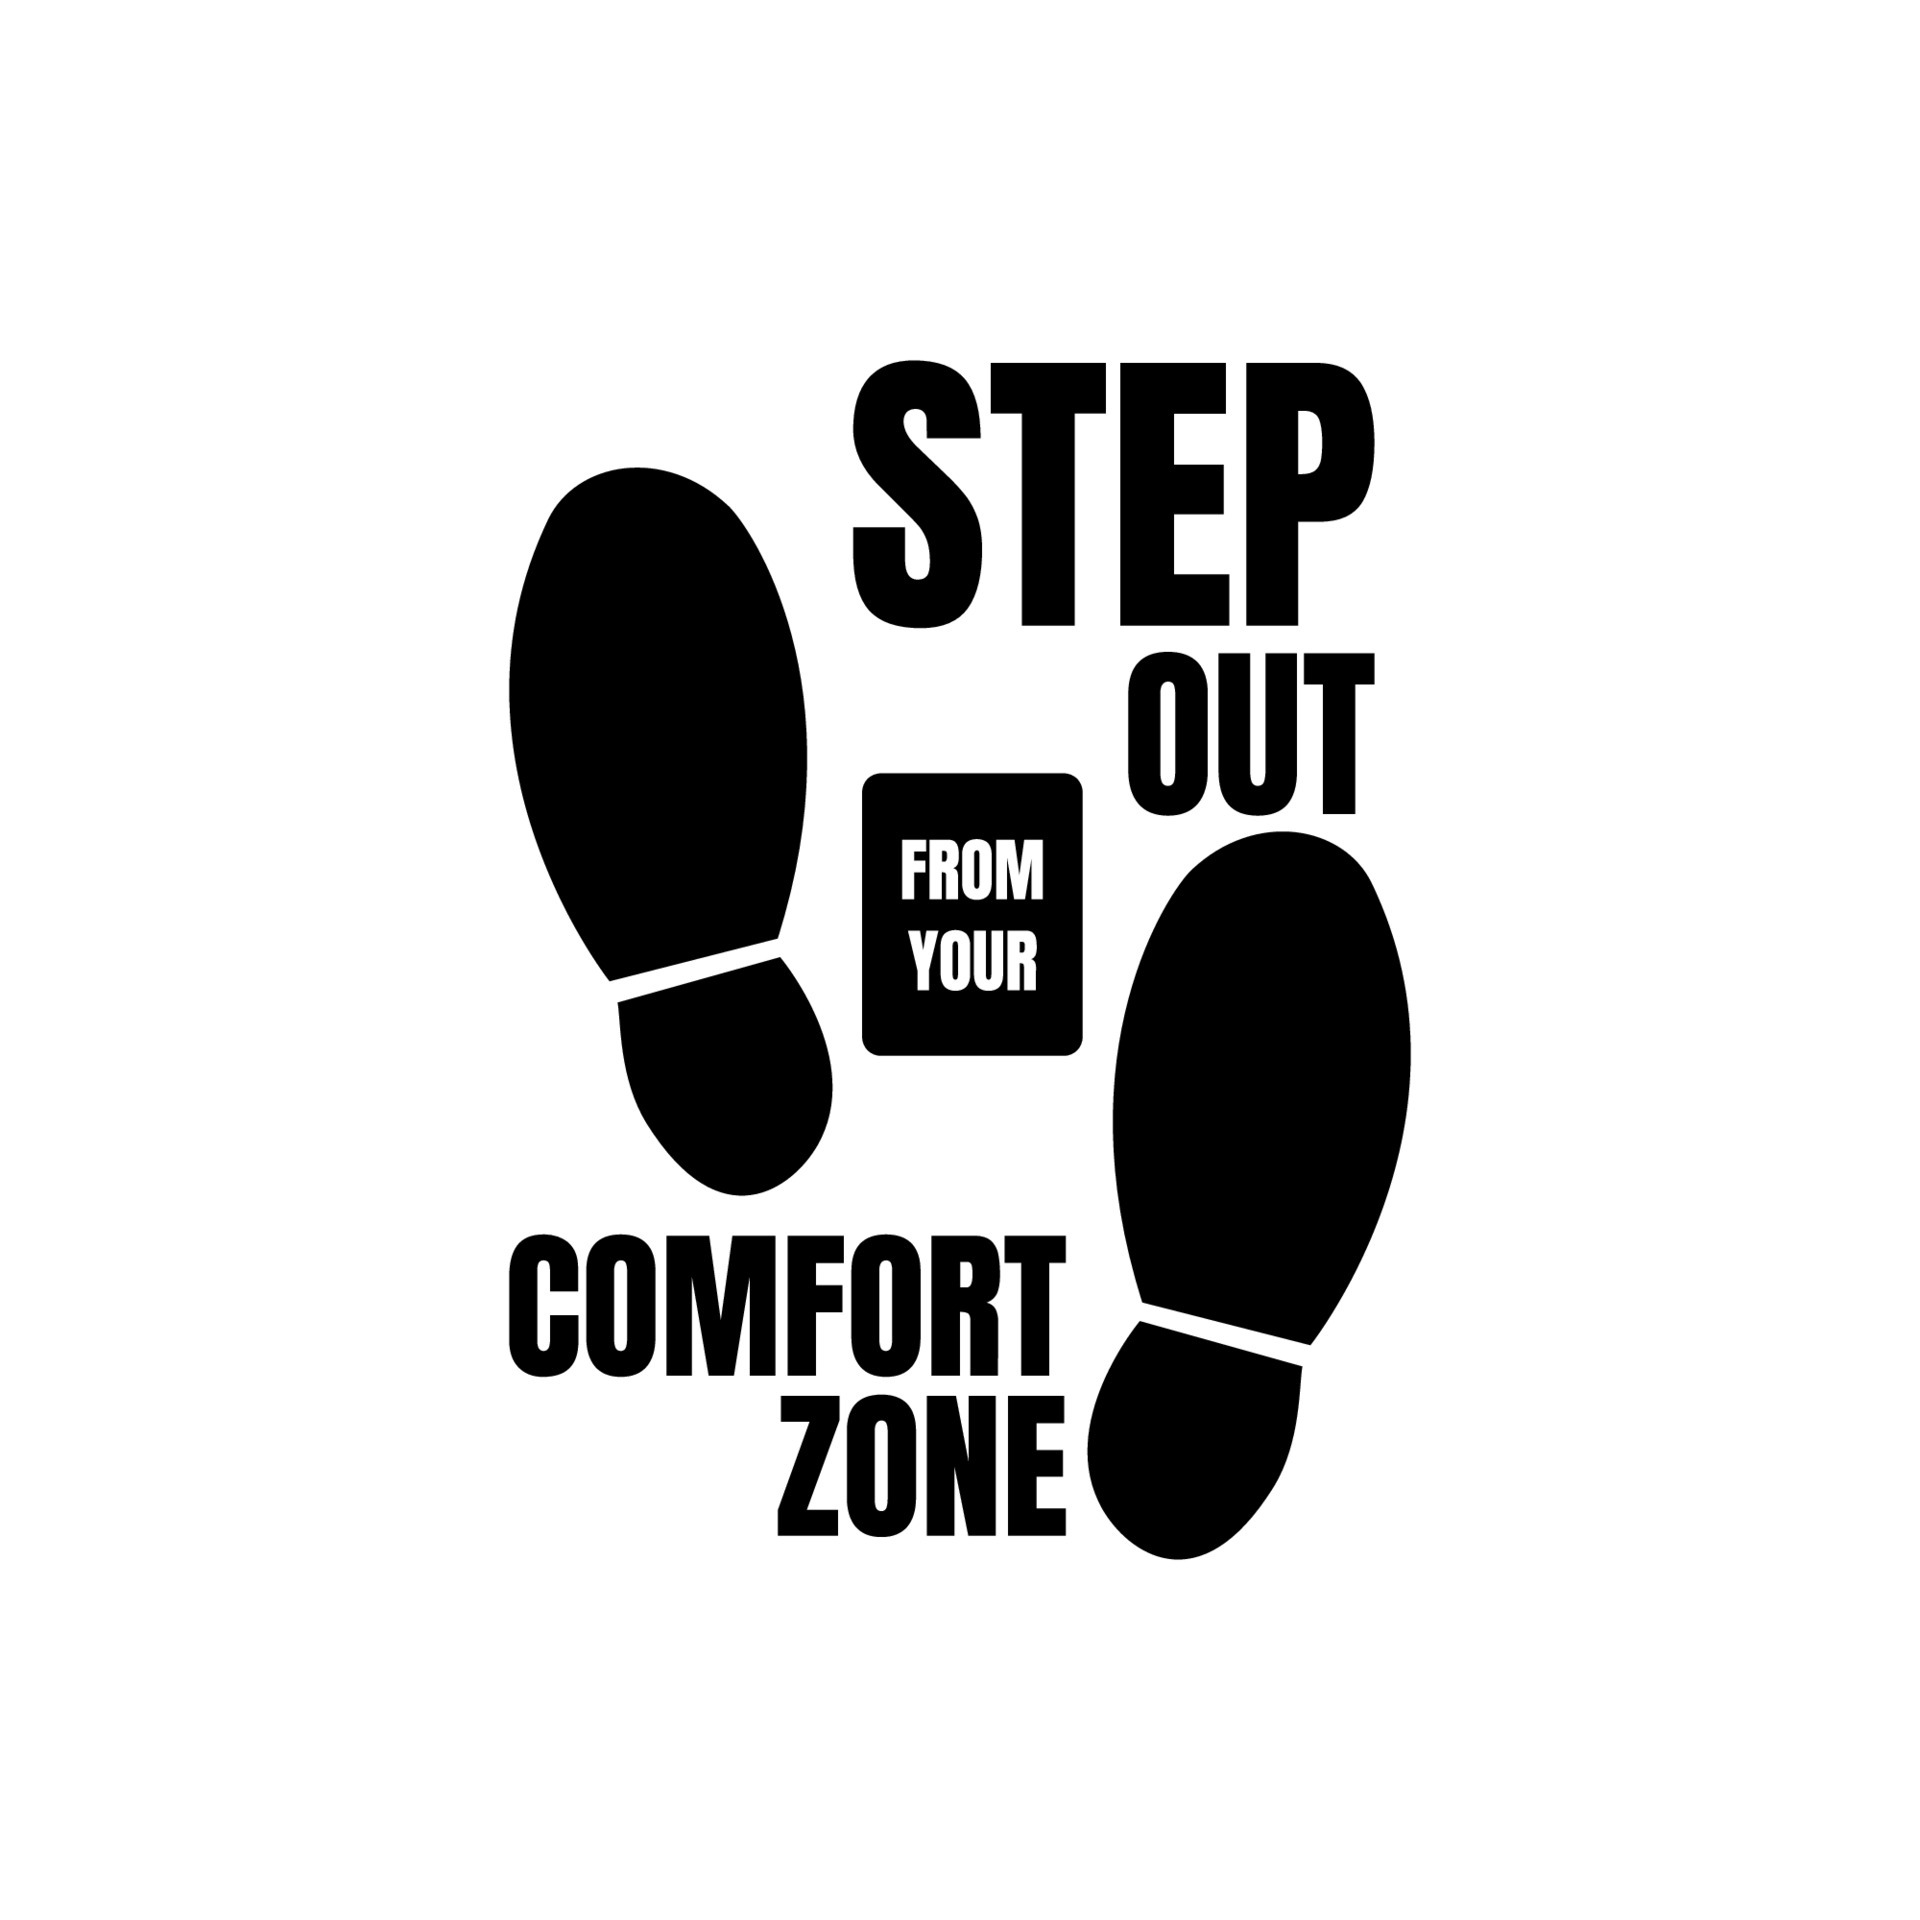 https://static.vecteezy.com/system/resources/previews/006/490/798/original/a-simple-typography-quotes-step-out-from-your-comfort-zone-inspirational-design-motivational-good-quotes-in-white-background-free-vector.jpg